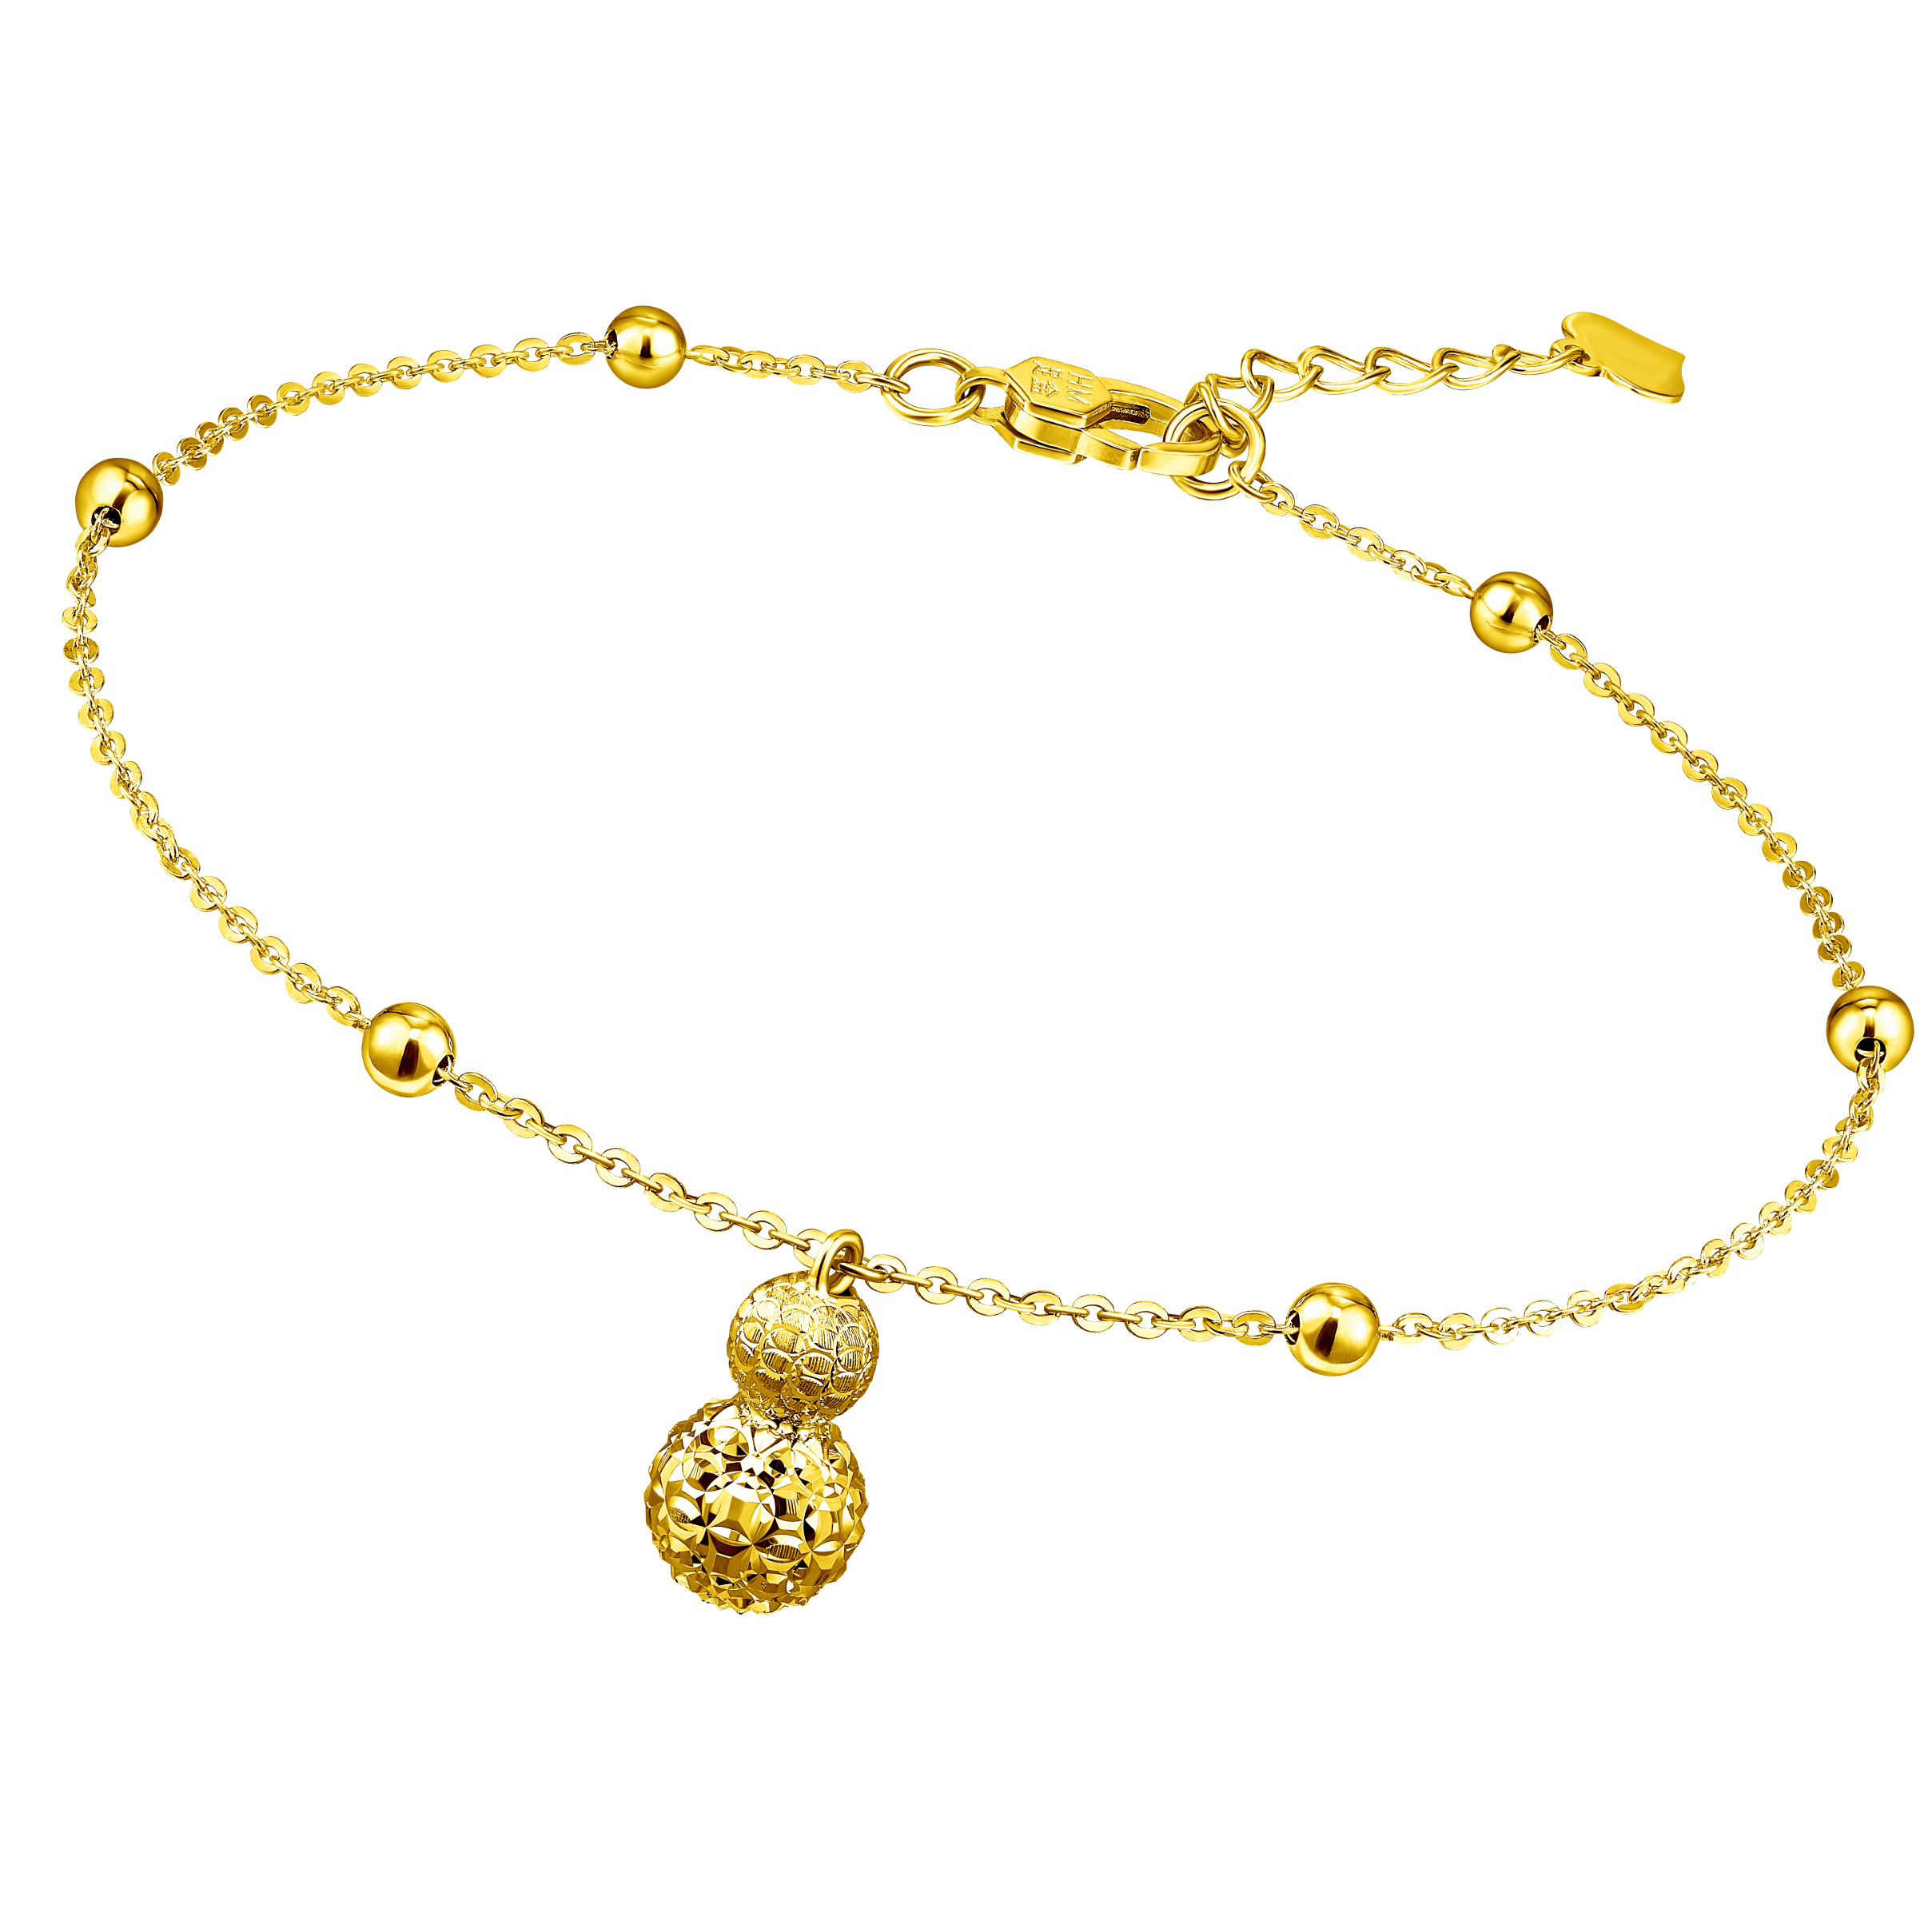 Goldstyle "Therapeutic Planet - Wulu" Gold Bracelet 